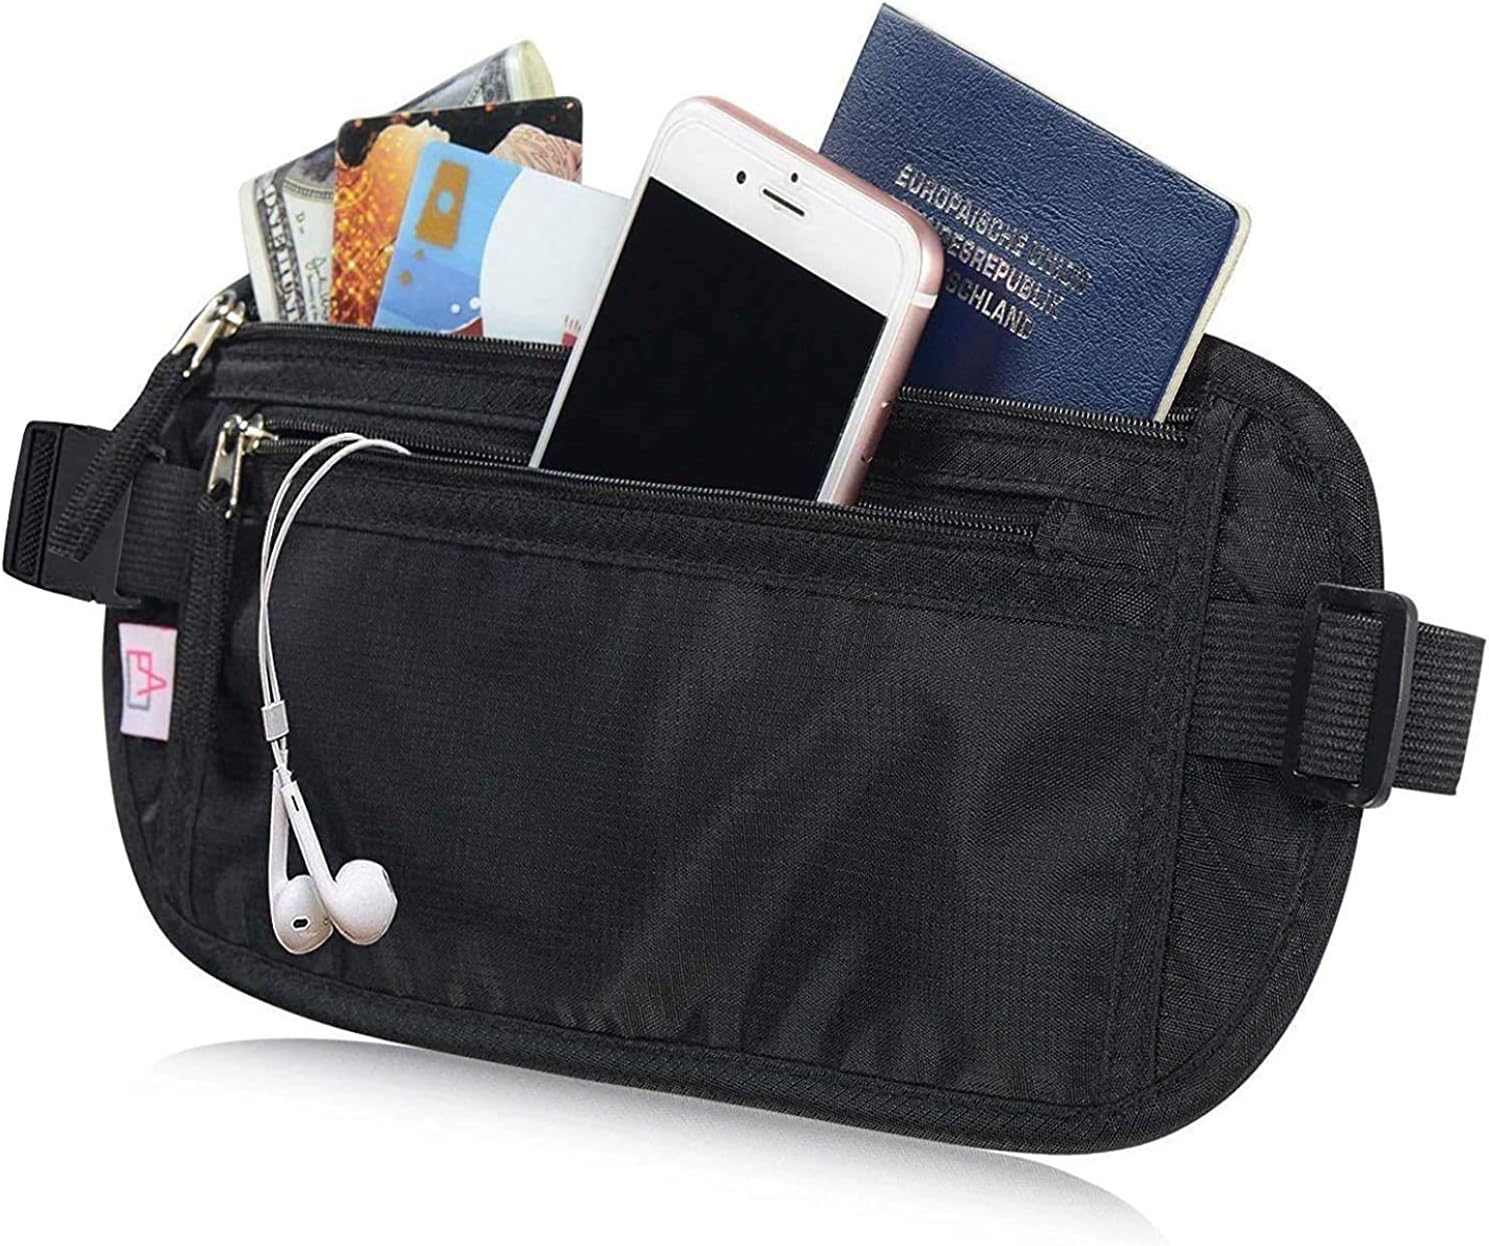 RFID blocking travel wallet with secure zippers, holding a passport, phone, cash, and earphones.